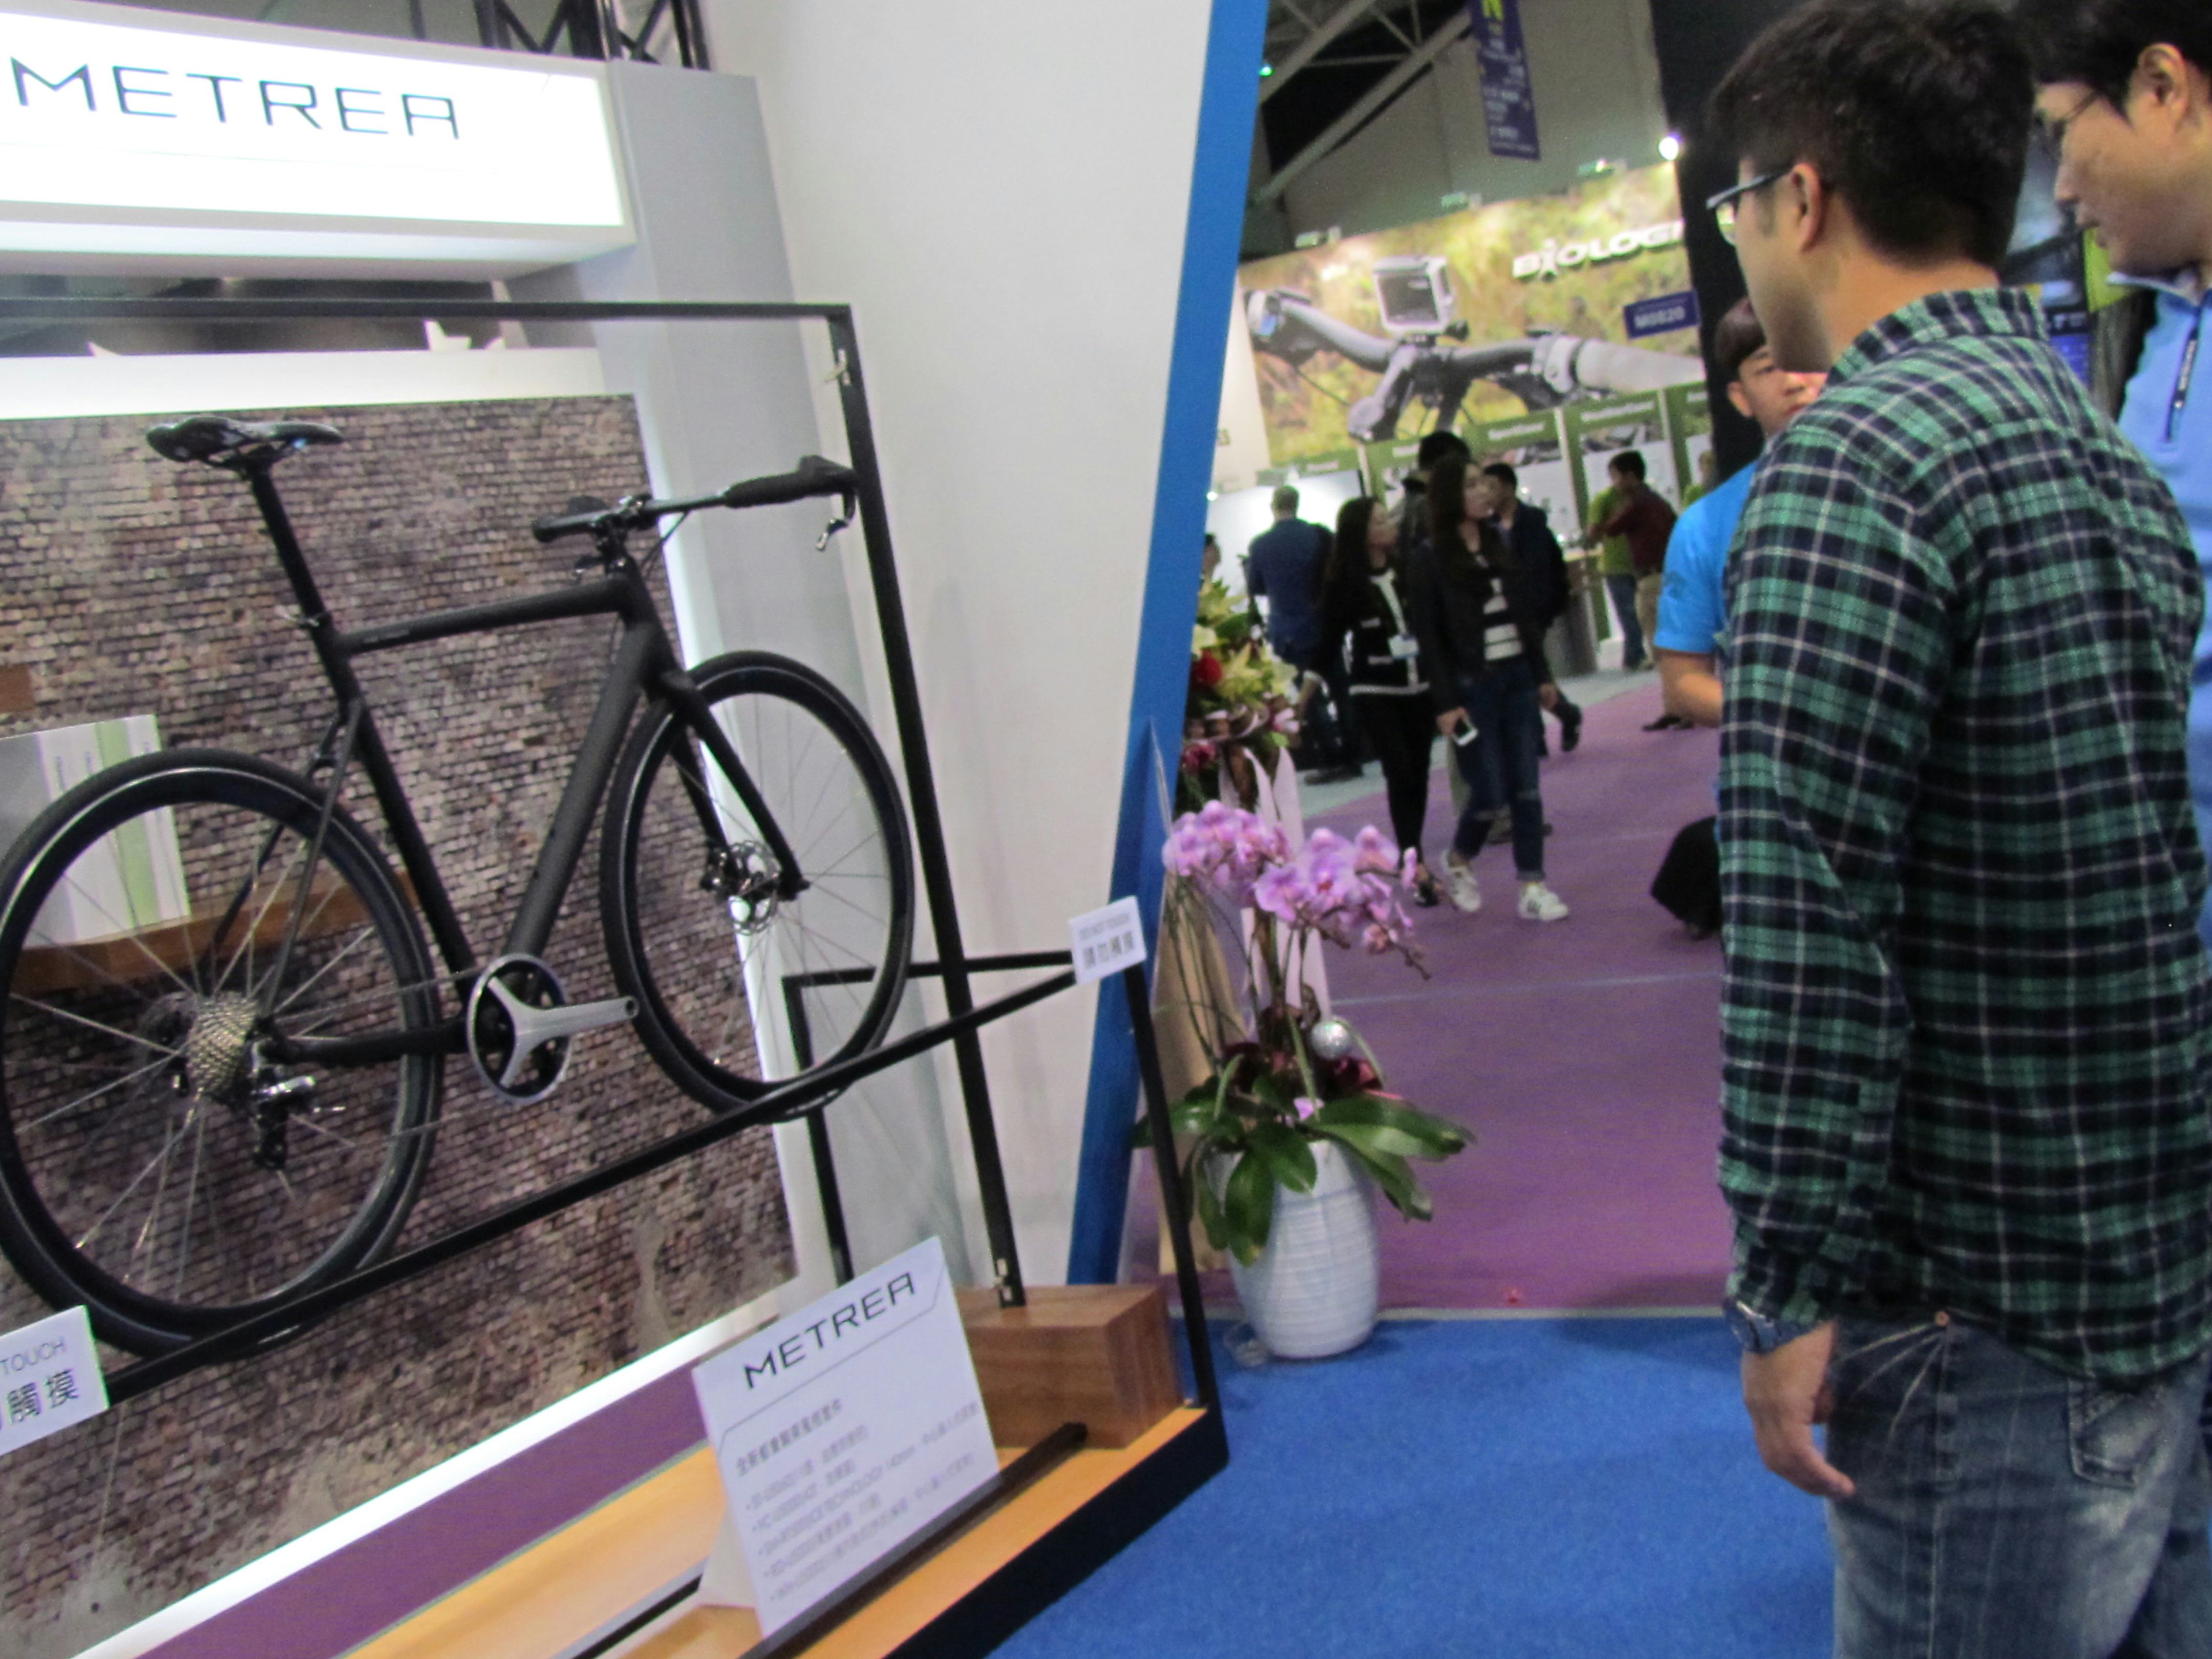 Metrea components are set to be available as after-market products in Europe from April 2016. Pictured here is the Metrea presentation Shimano had at last week’s Taipei Cycle Show. – Photo Bike Europe